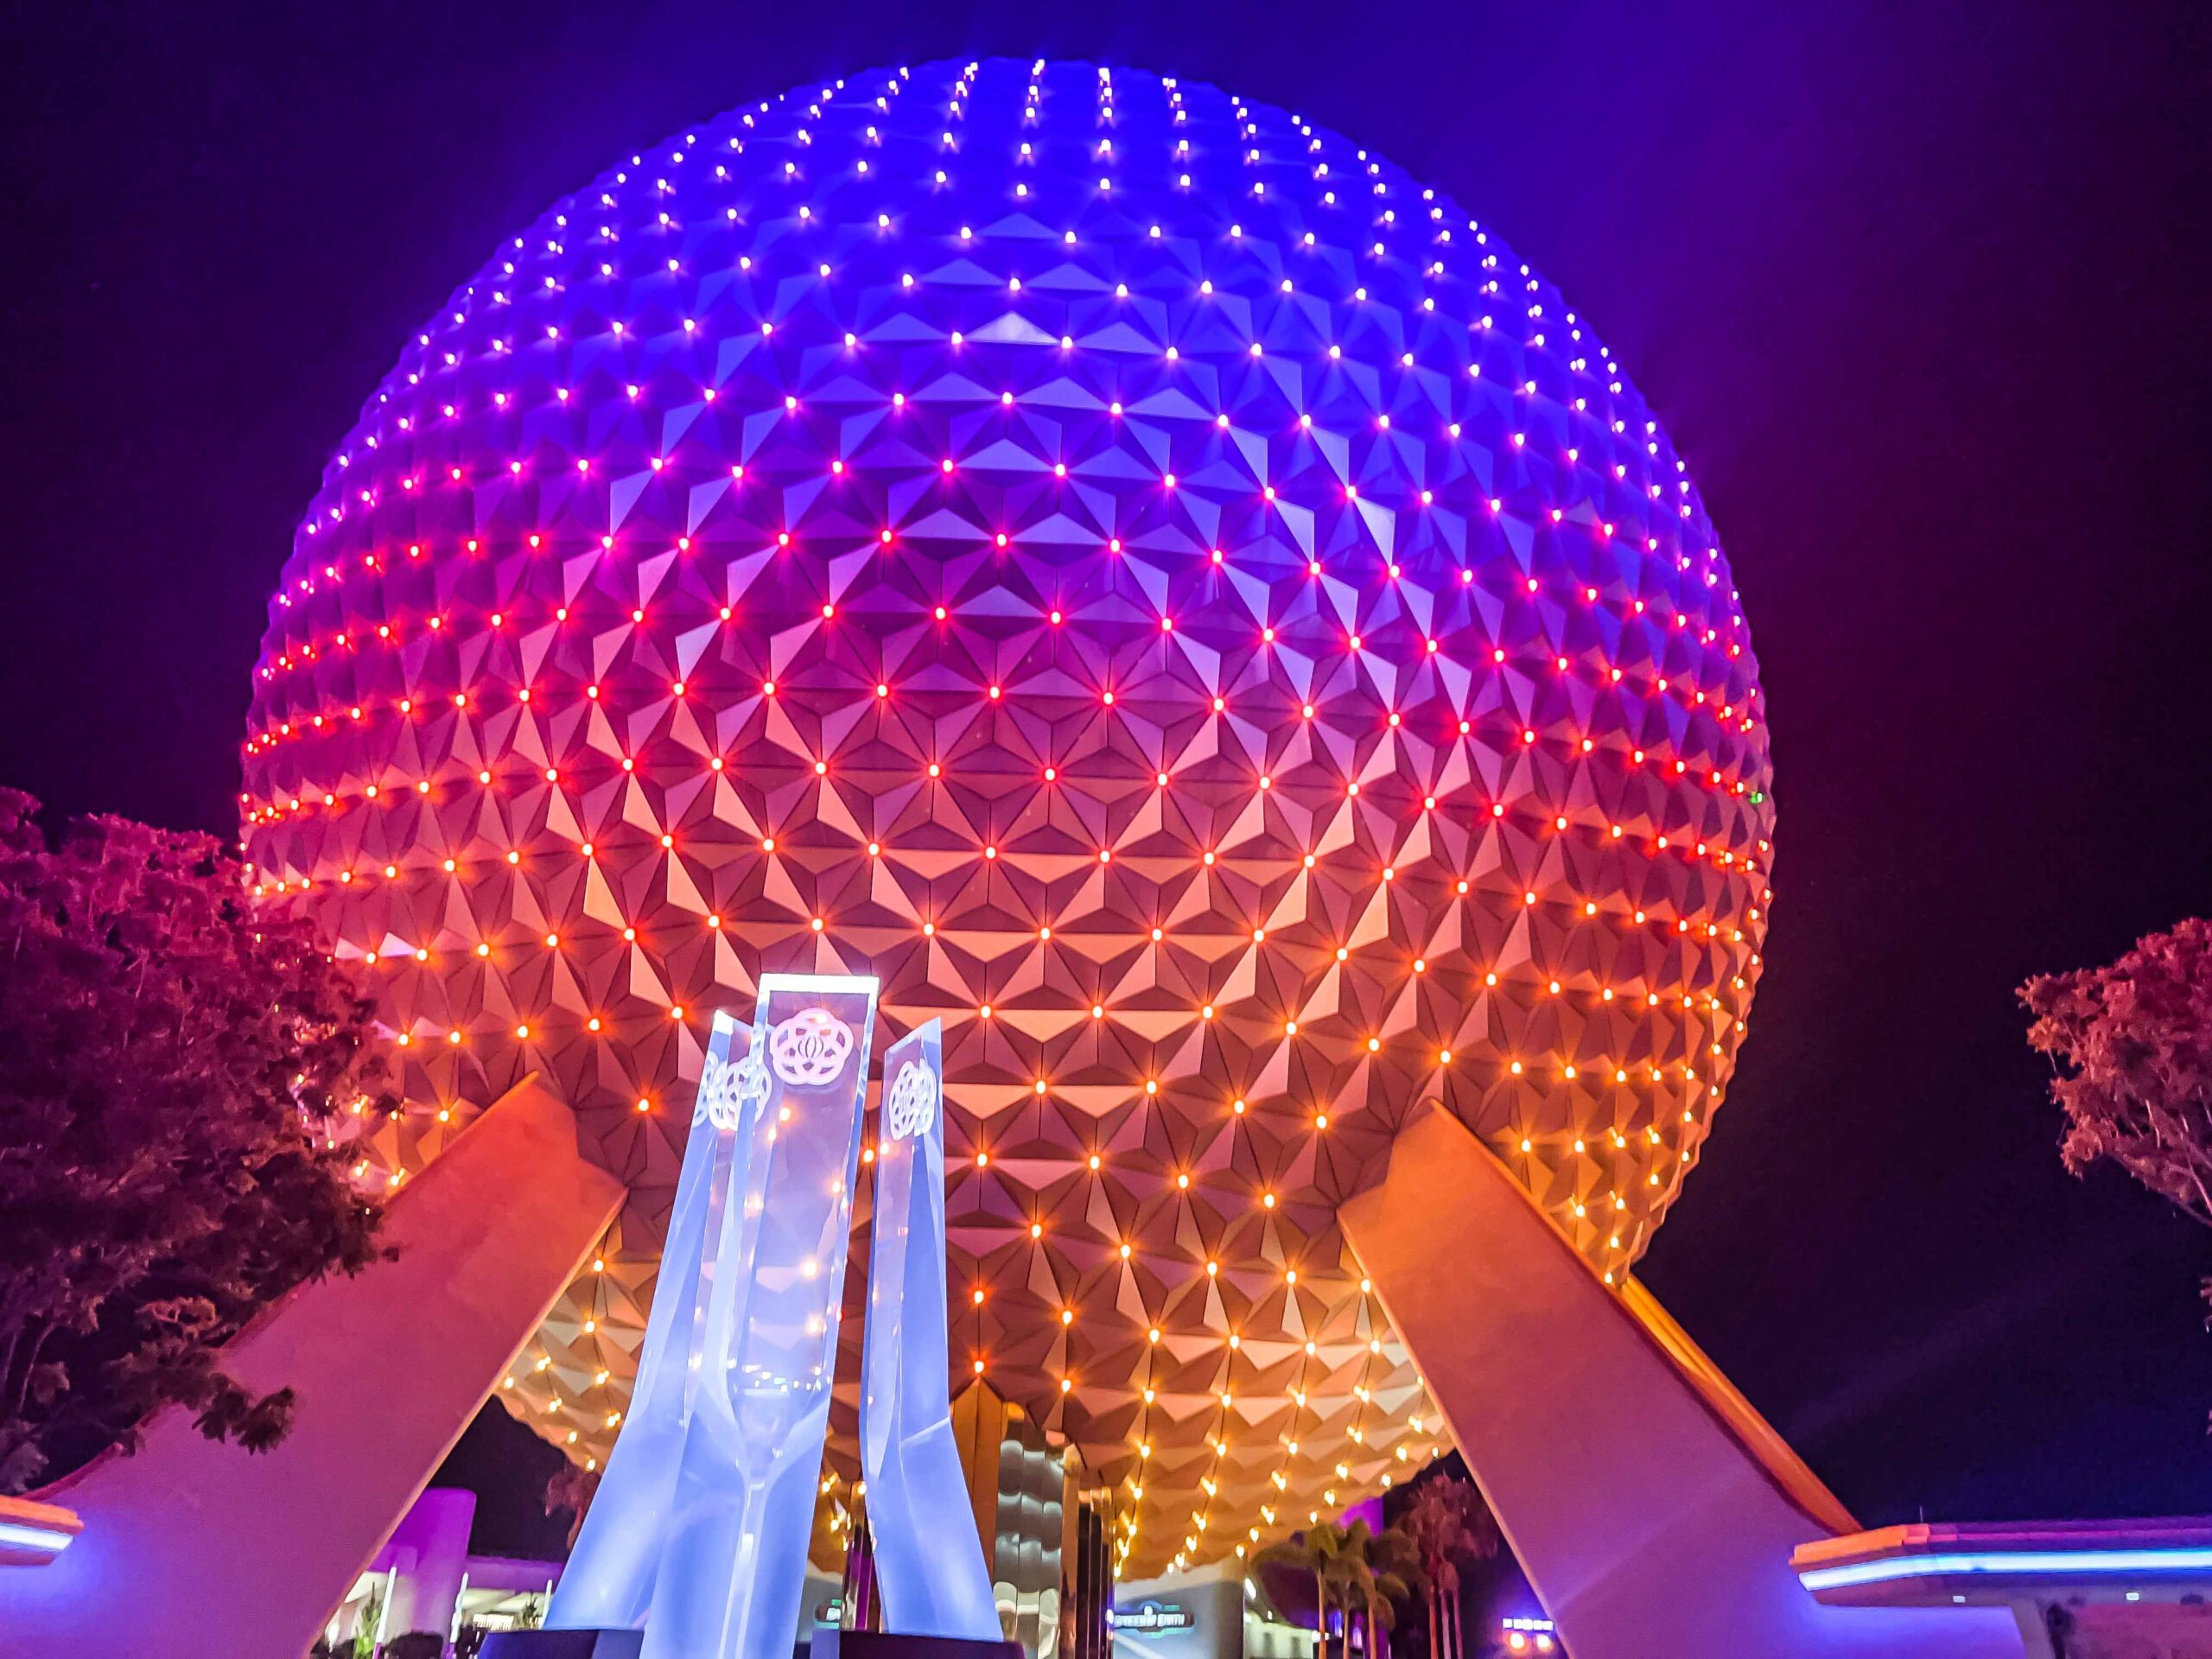 Did you know that space ship earth is one of the Epcot rides that locals love the most